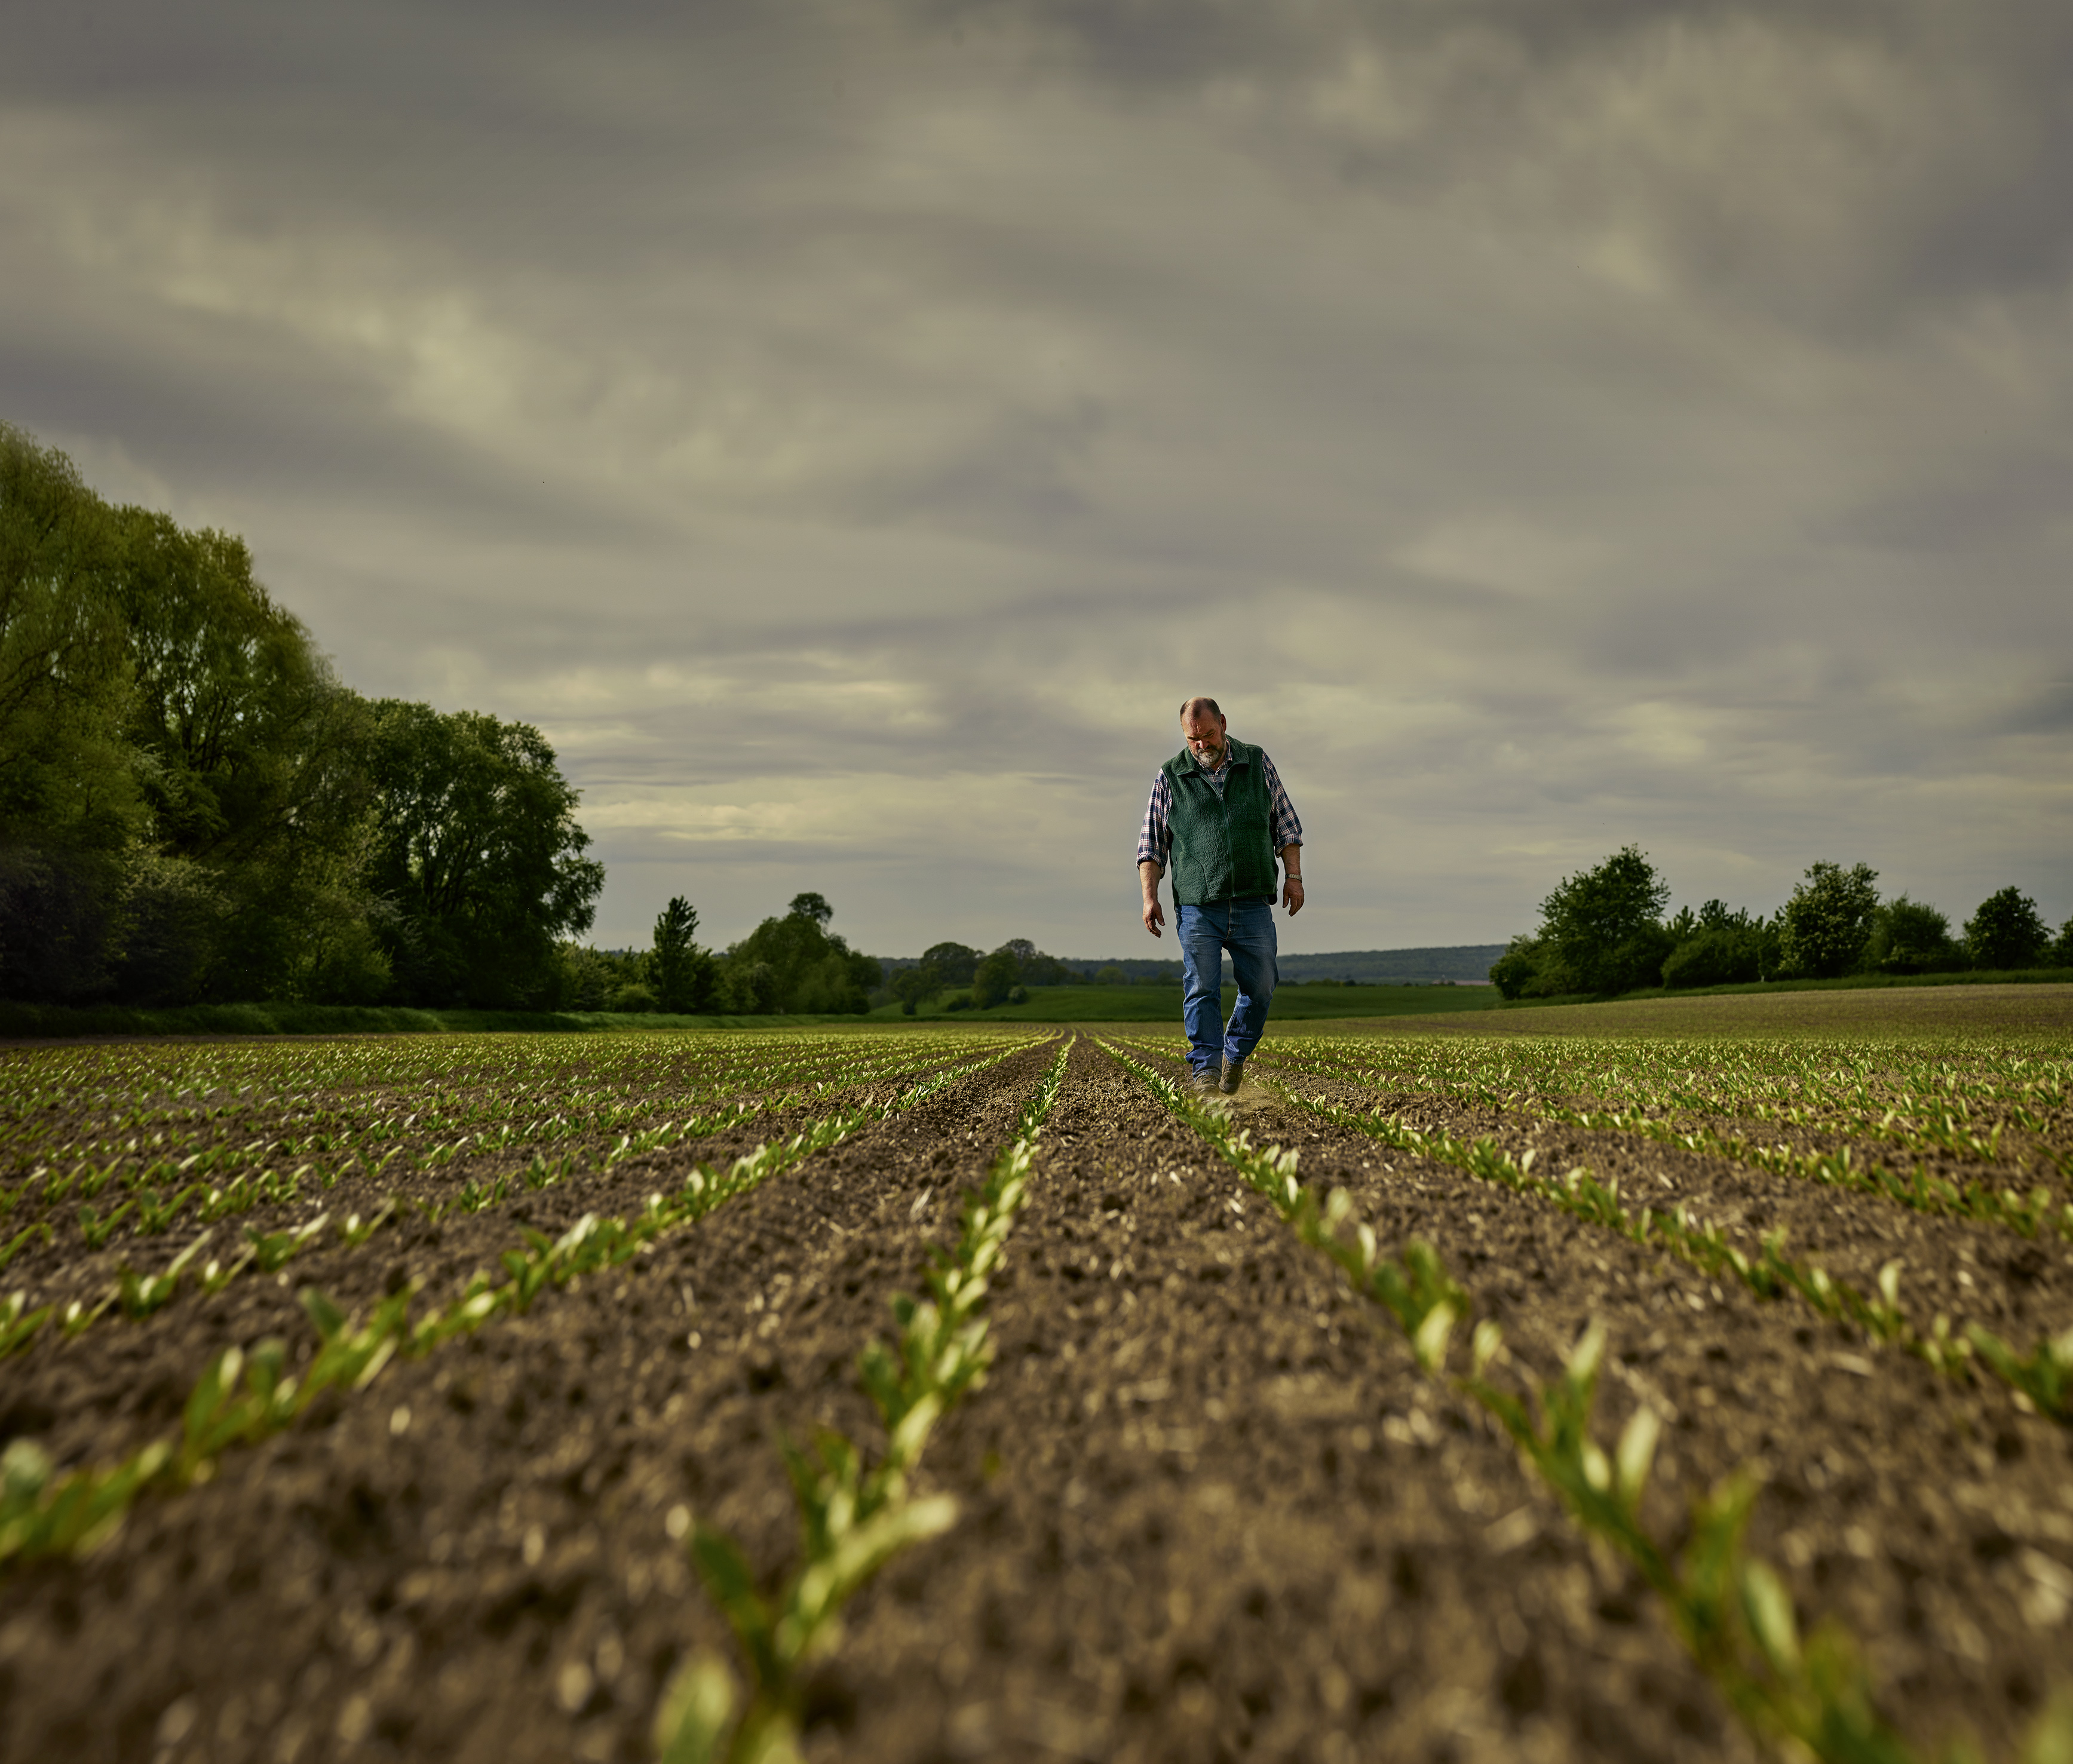 Low angle perspective photo of a middle-aged farmer walking across his sugar beet field with sprouting plants